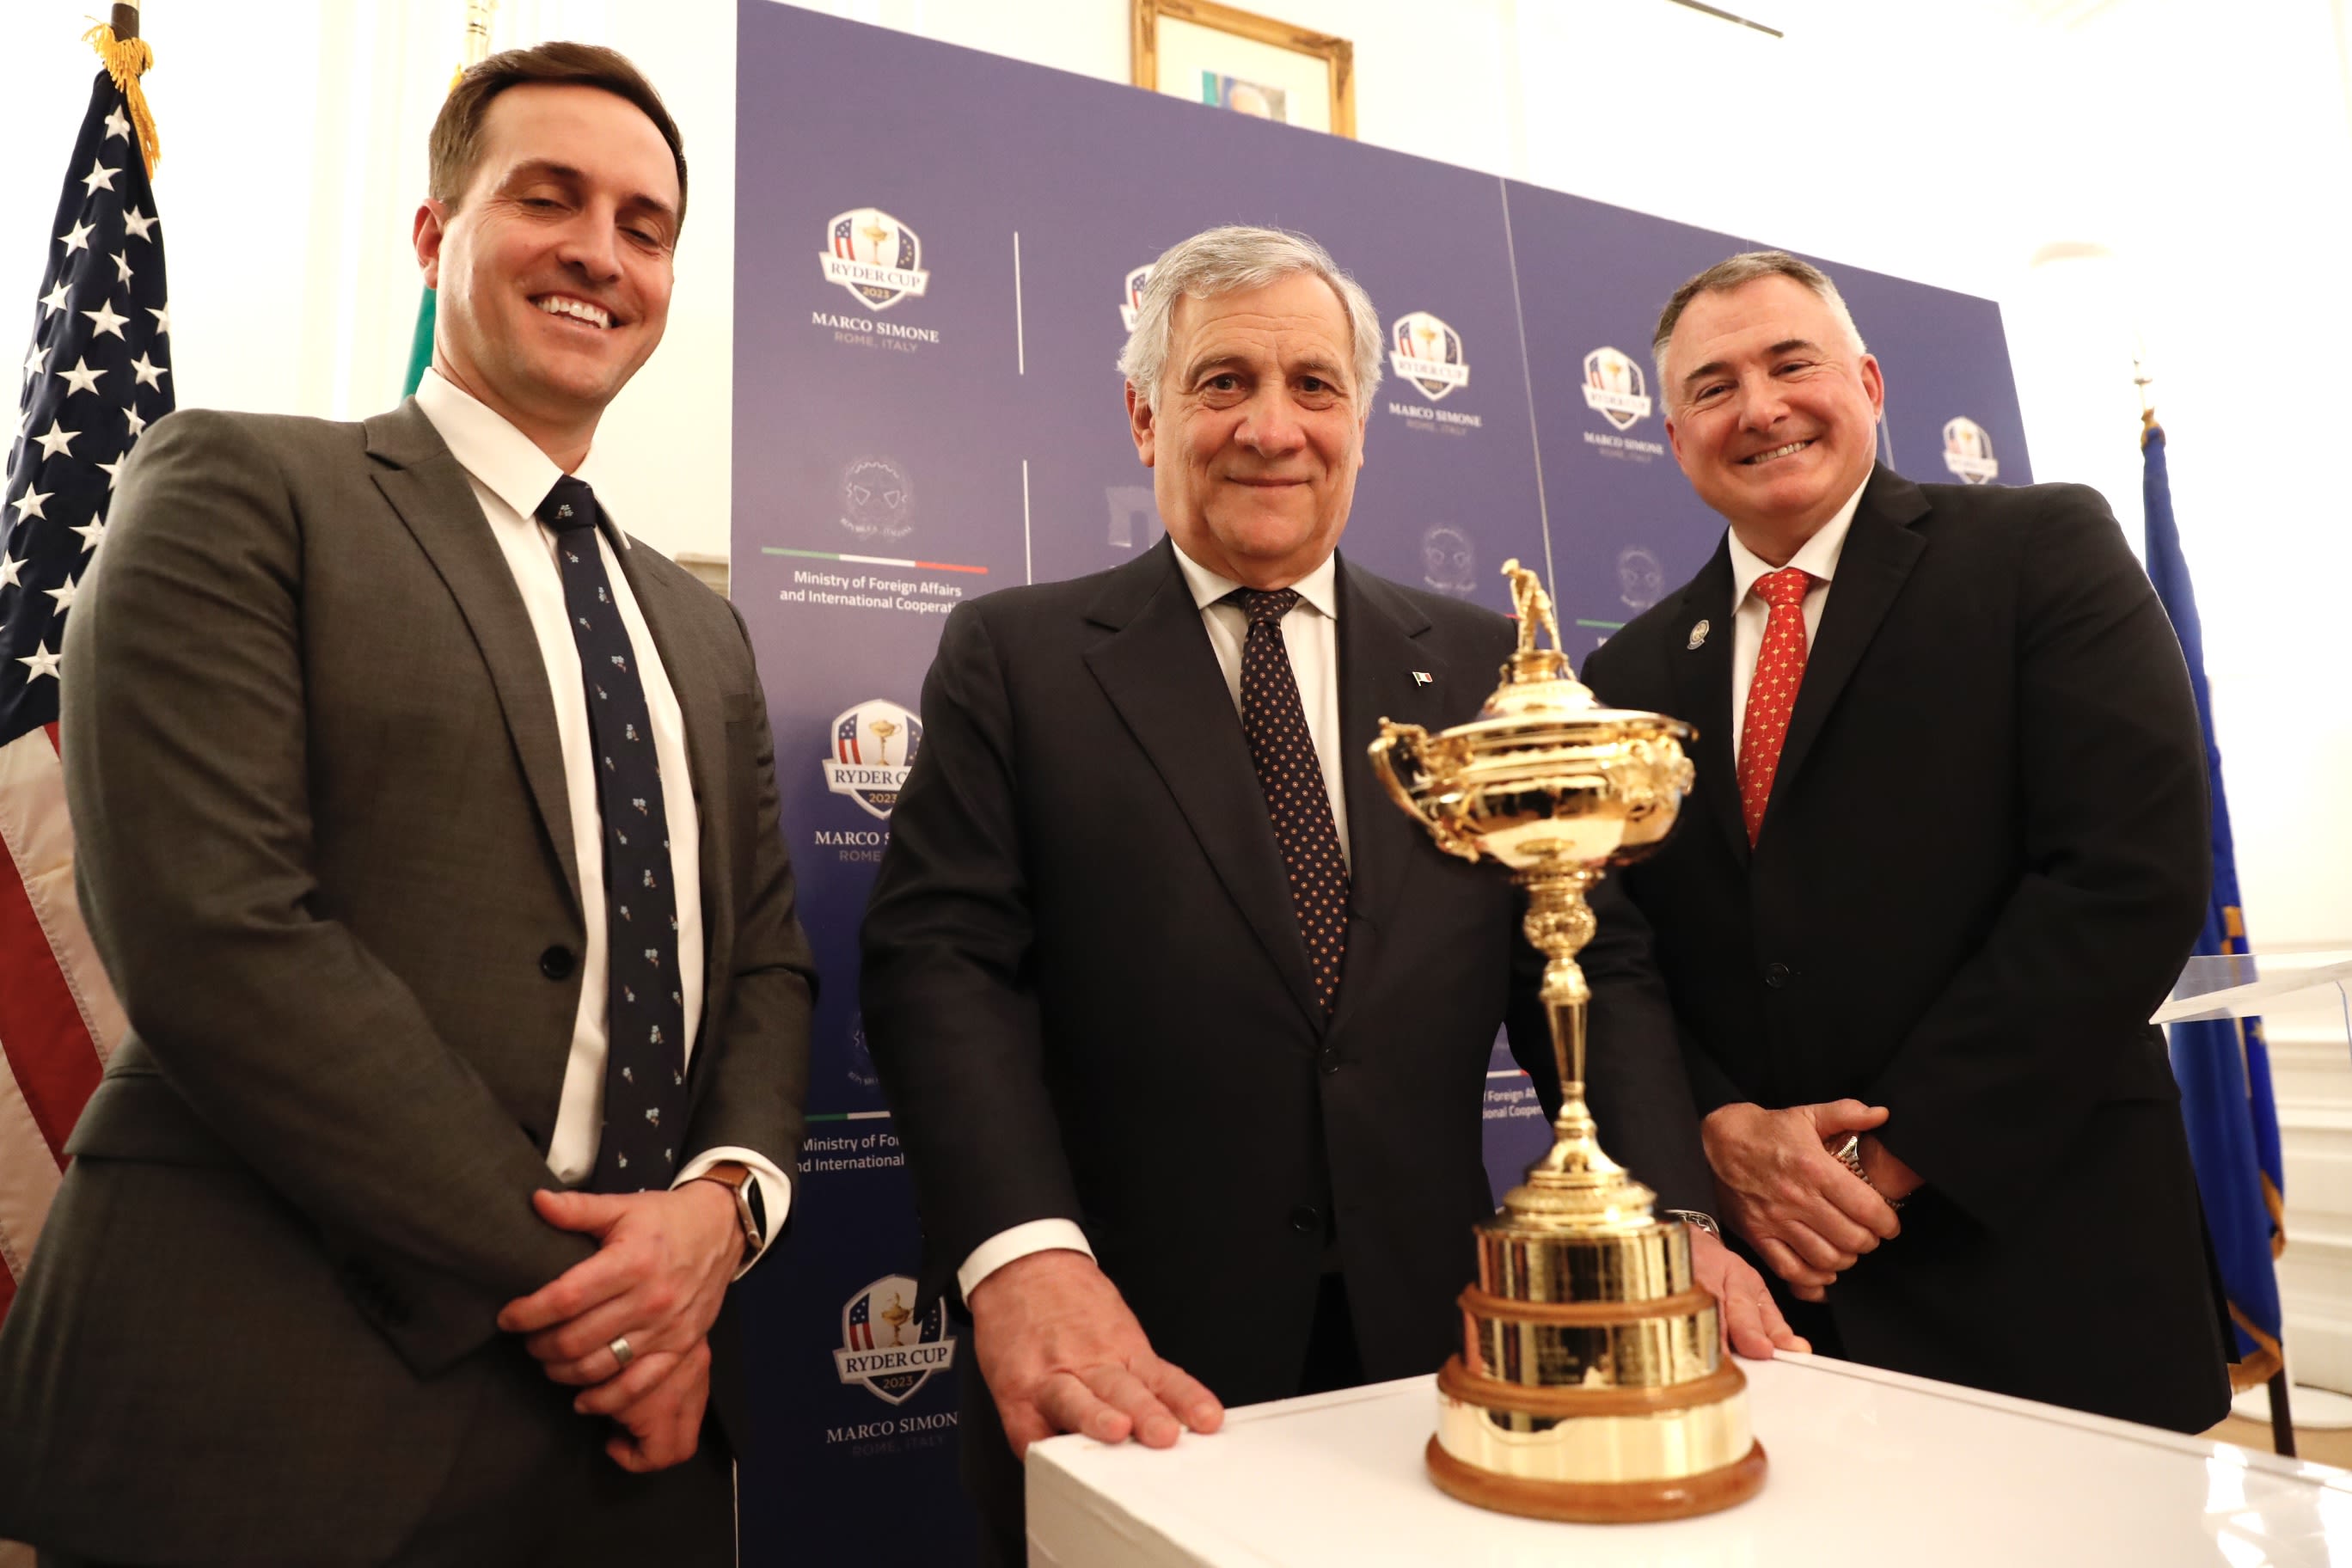 Bryan Karns, the 2025 Ryder Cup Director, Deputy Prime Minister Tajani and Rea pose with the Ryder Cup.